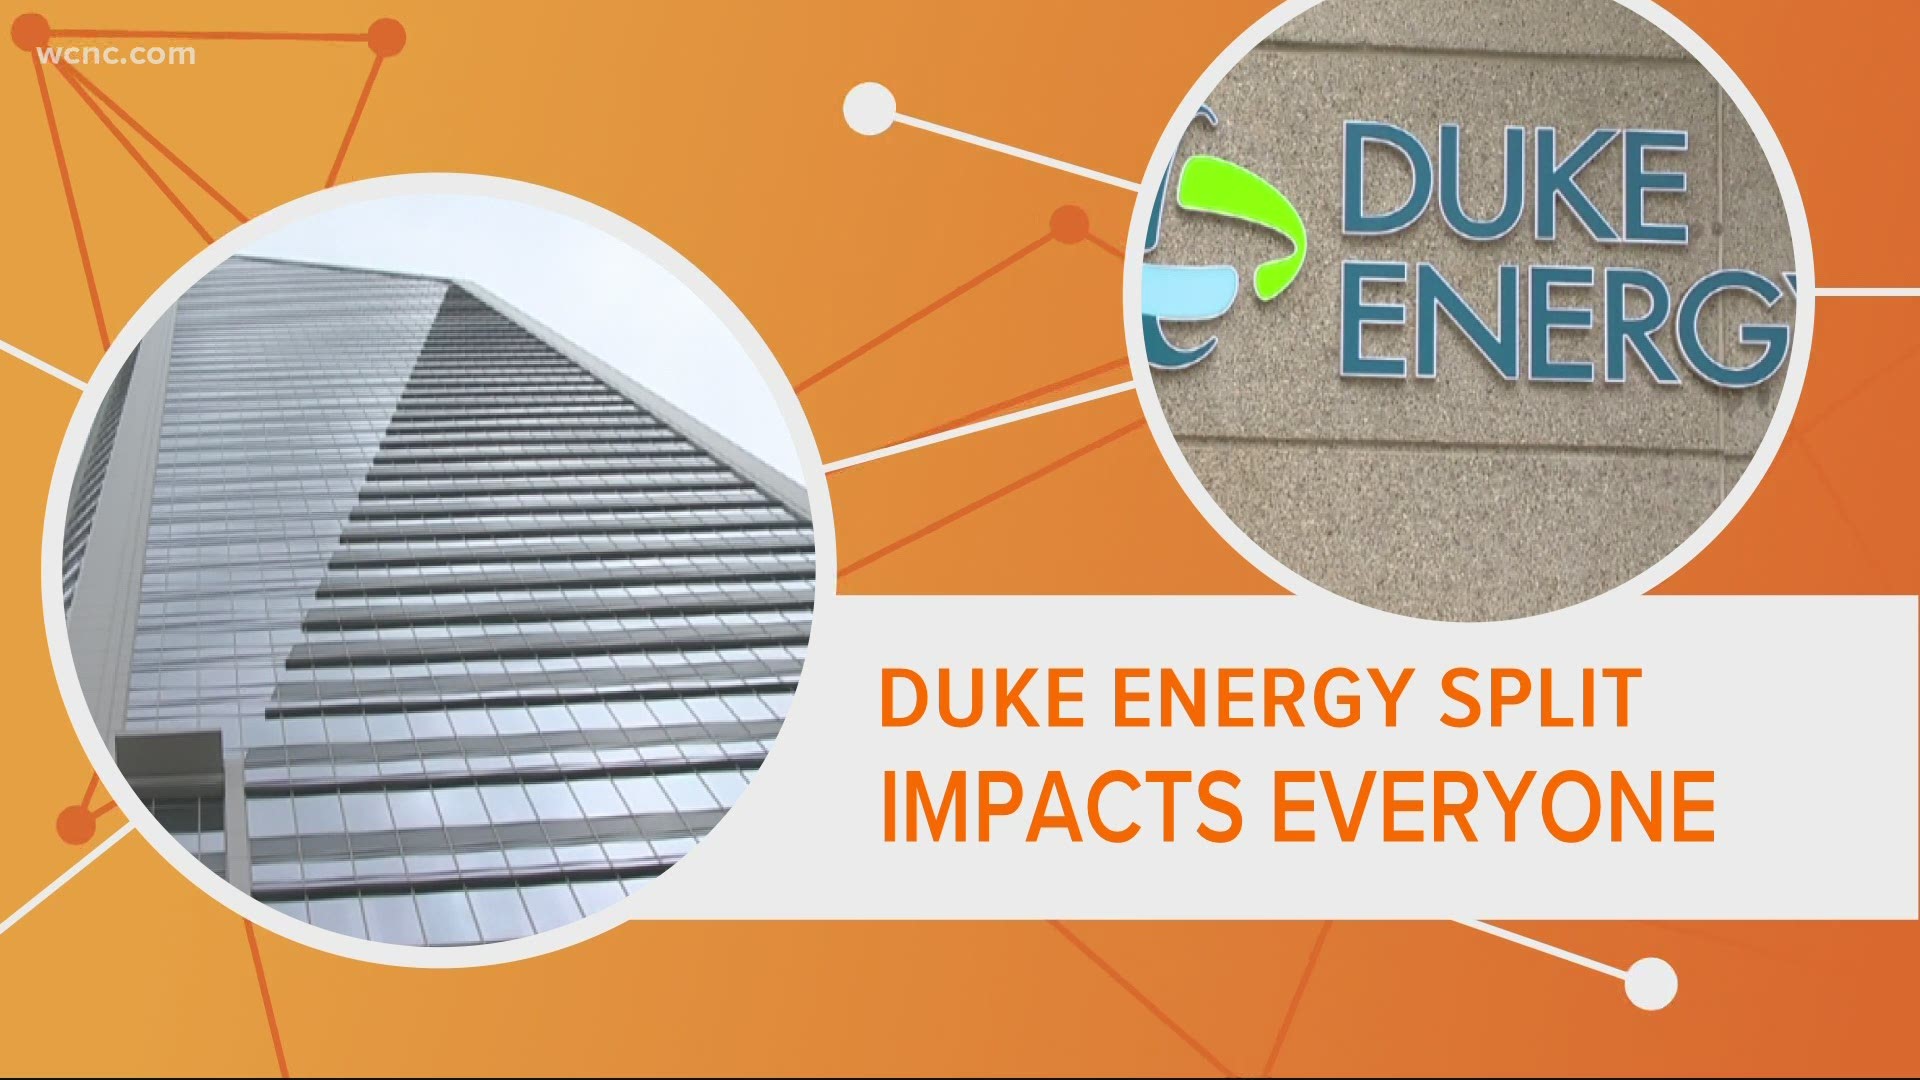 A hedge fund wants Duke Energy to be split into 3 separate companies, saying the company would be more profitable and more efficient. NC leaders have other ideas.